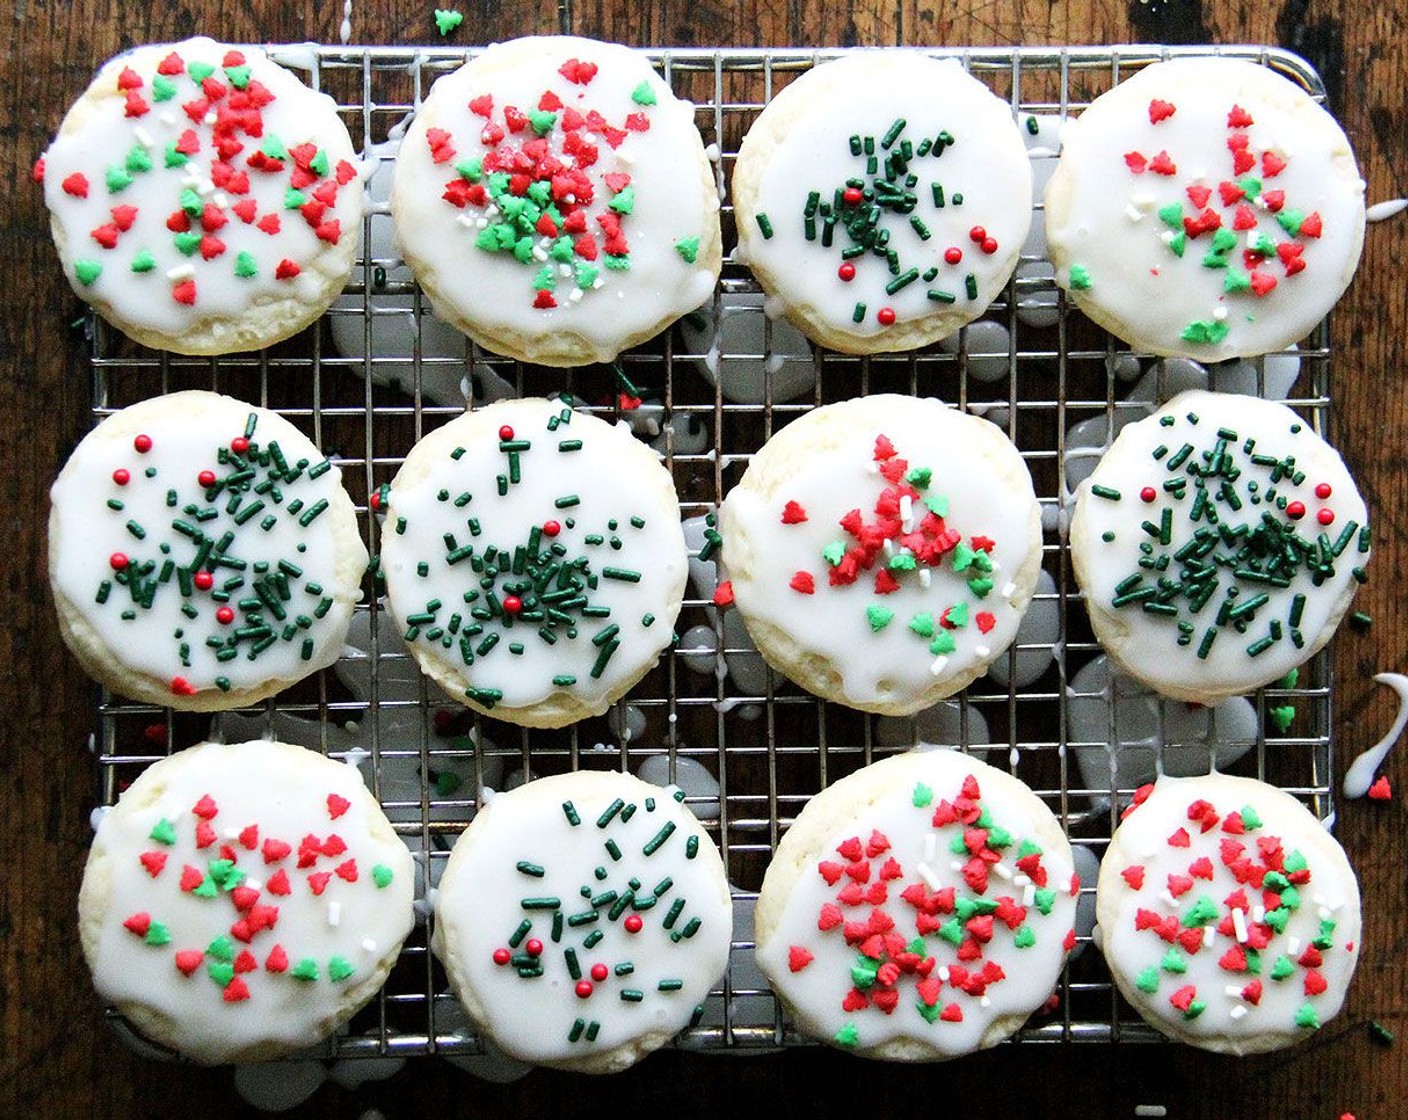 step 10 Meanwhile, stir together the Powdered Confectioners Sugar (1 cup) with Milk (1 Tbsp). You may add more milk a tablespoon at a time to achieve a thick but pourable consistency. Spoon icing onto the cookie, spreading to cover. Shower with Sprinkles (to taste). Enjoy!